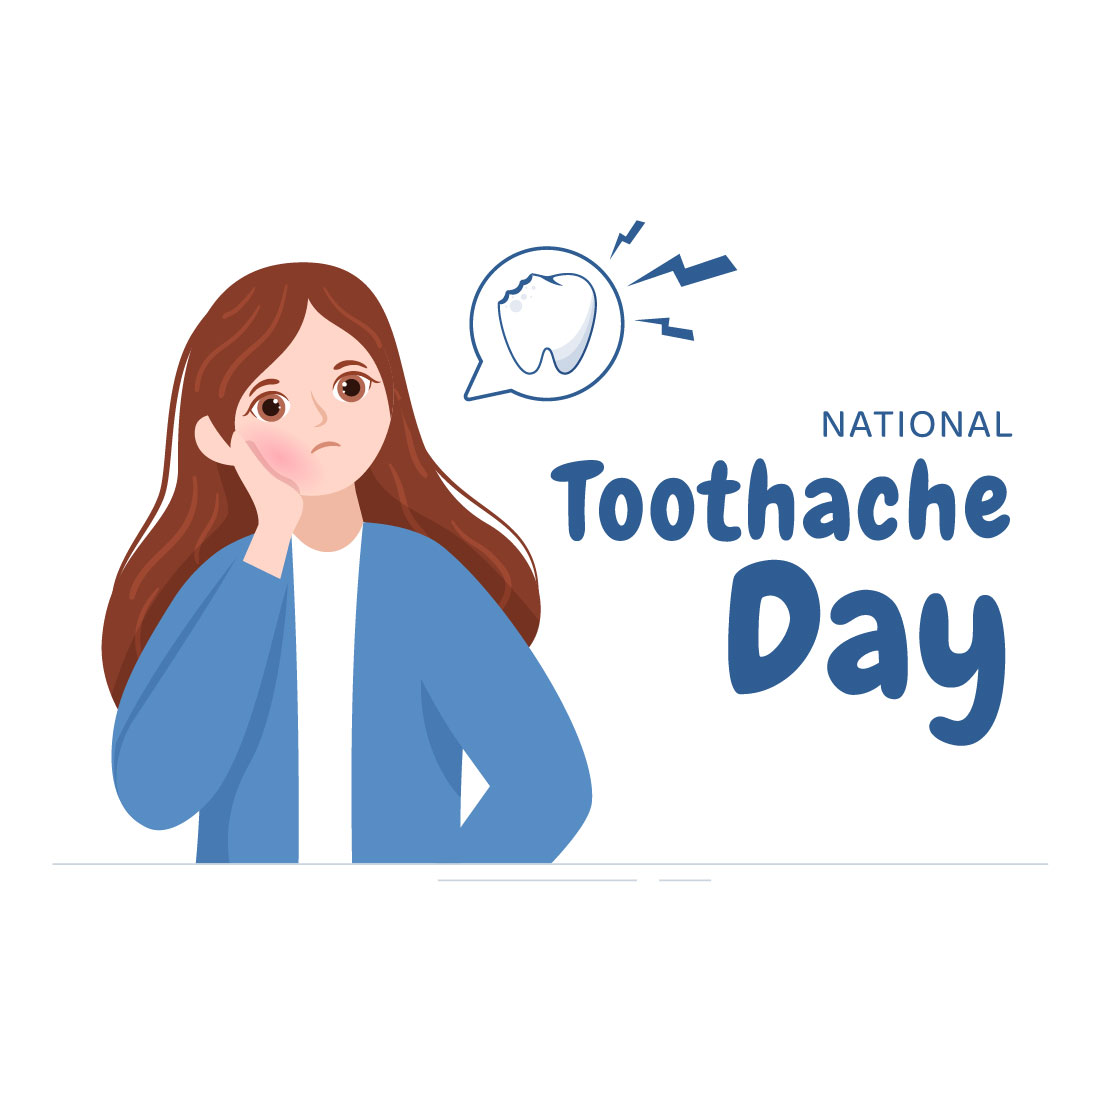 Toothache Day Design Illustrations cover image.